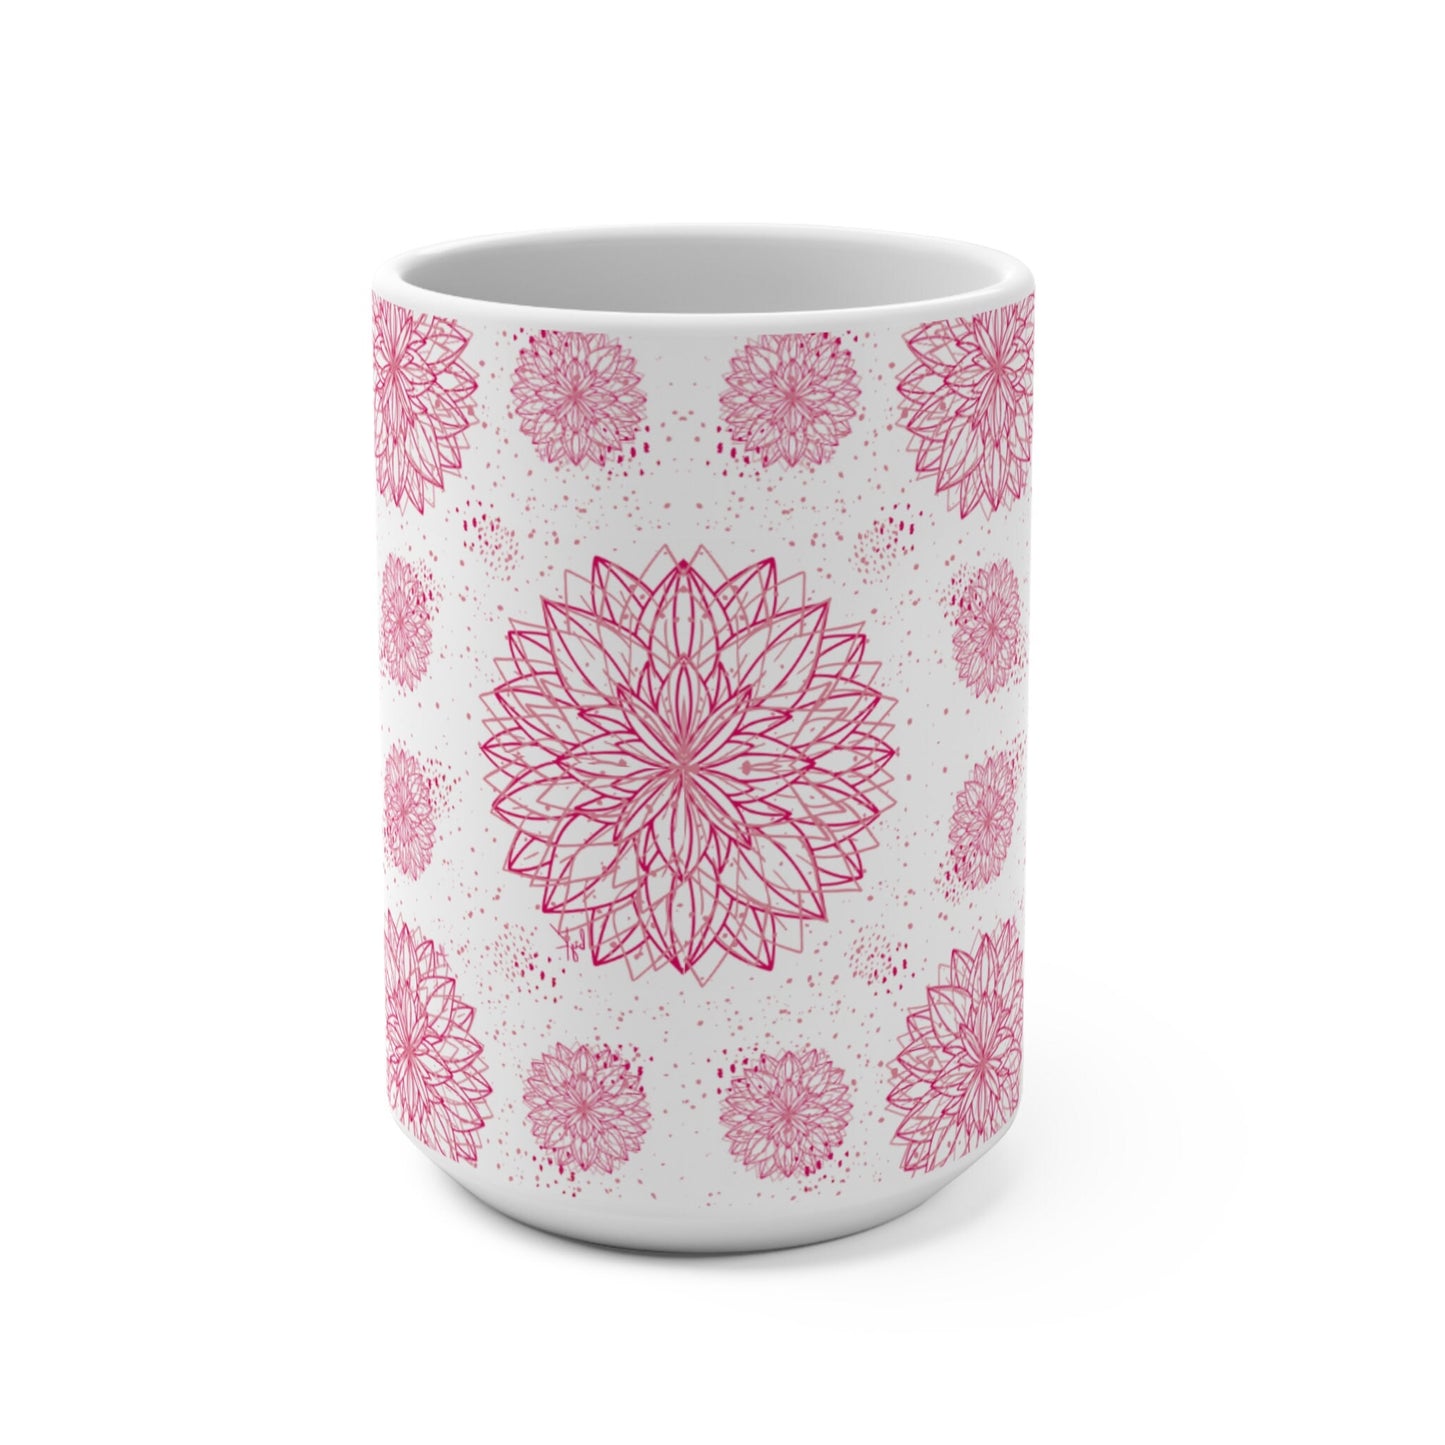 Mug 15oz - Designed byKath.com, all over floral print in pink and white